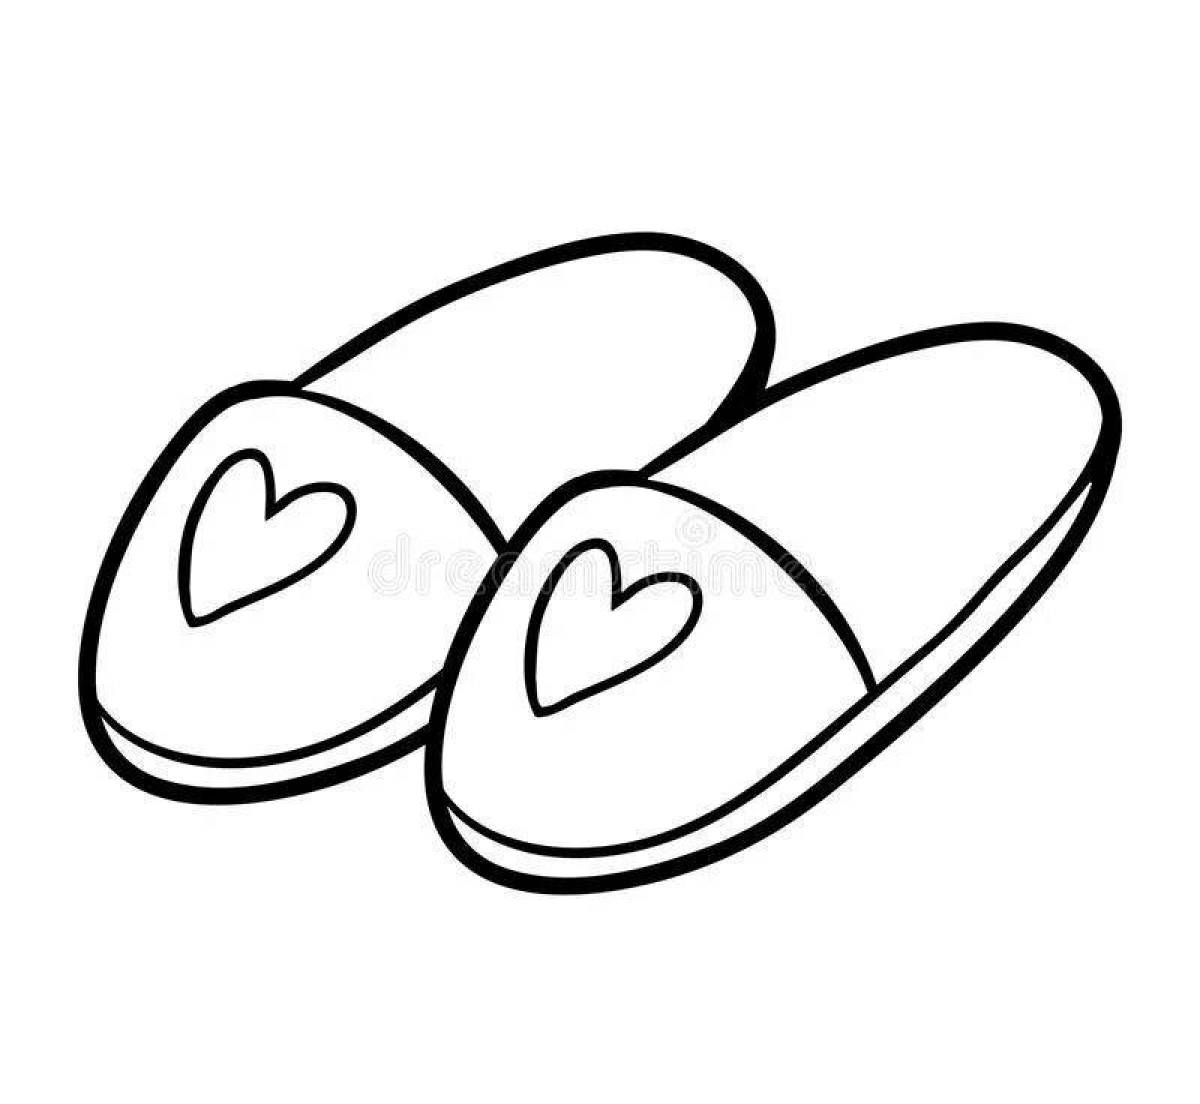 Coloring page humorous slippers